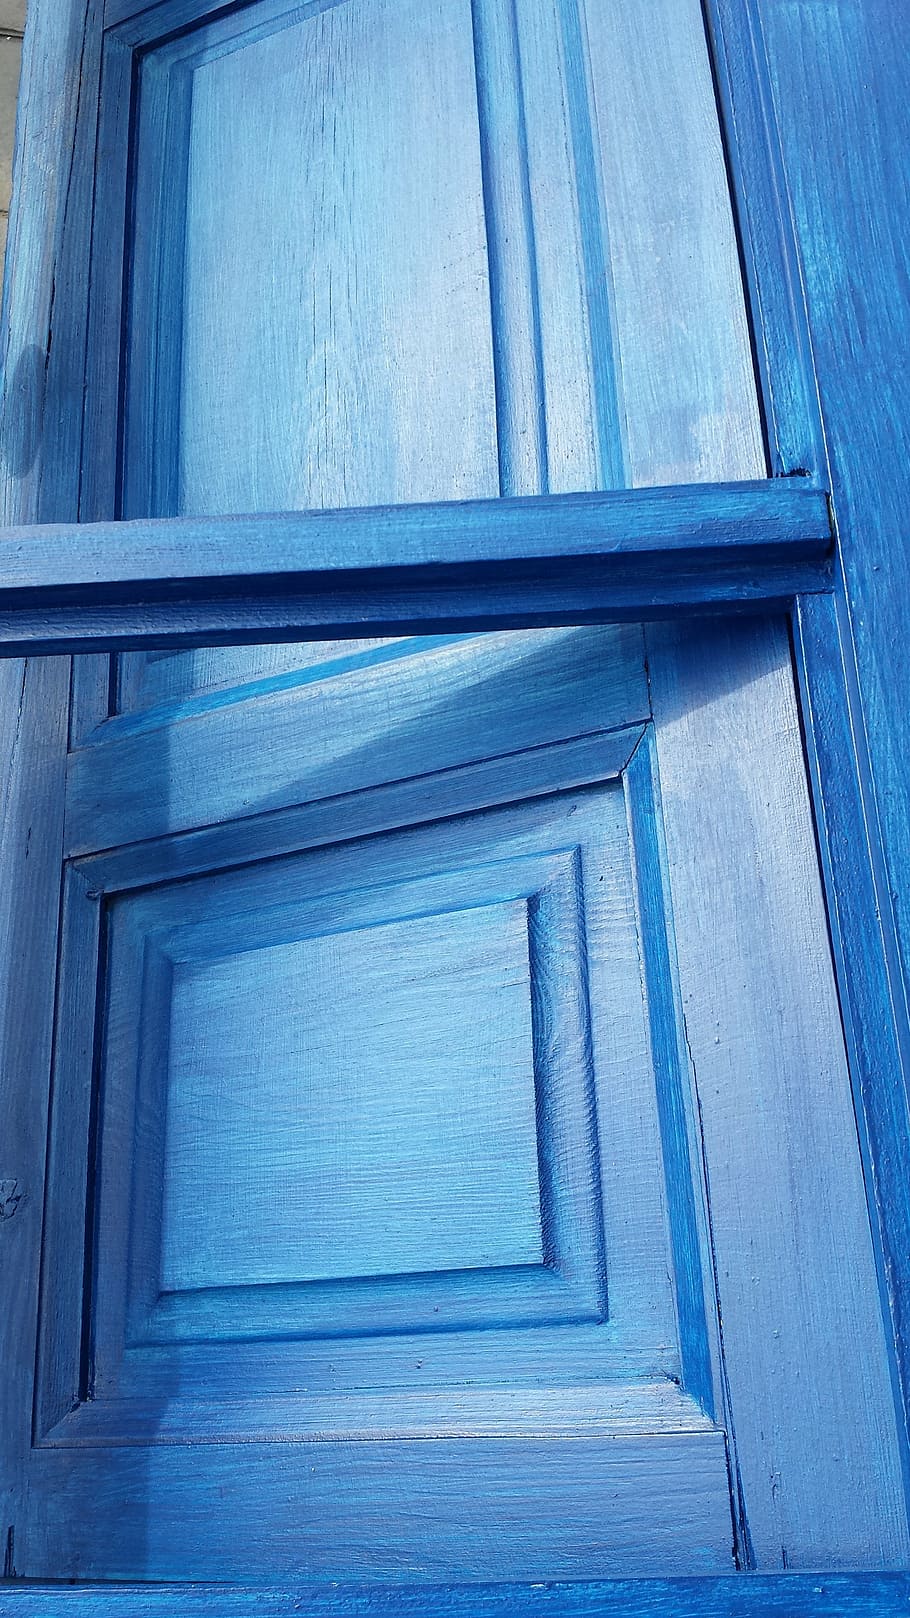 window, blue, wood, angles, pictures, geometry, indigo, ink, wood - Material, architecture